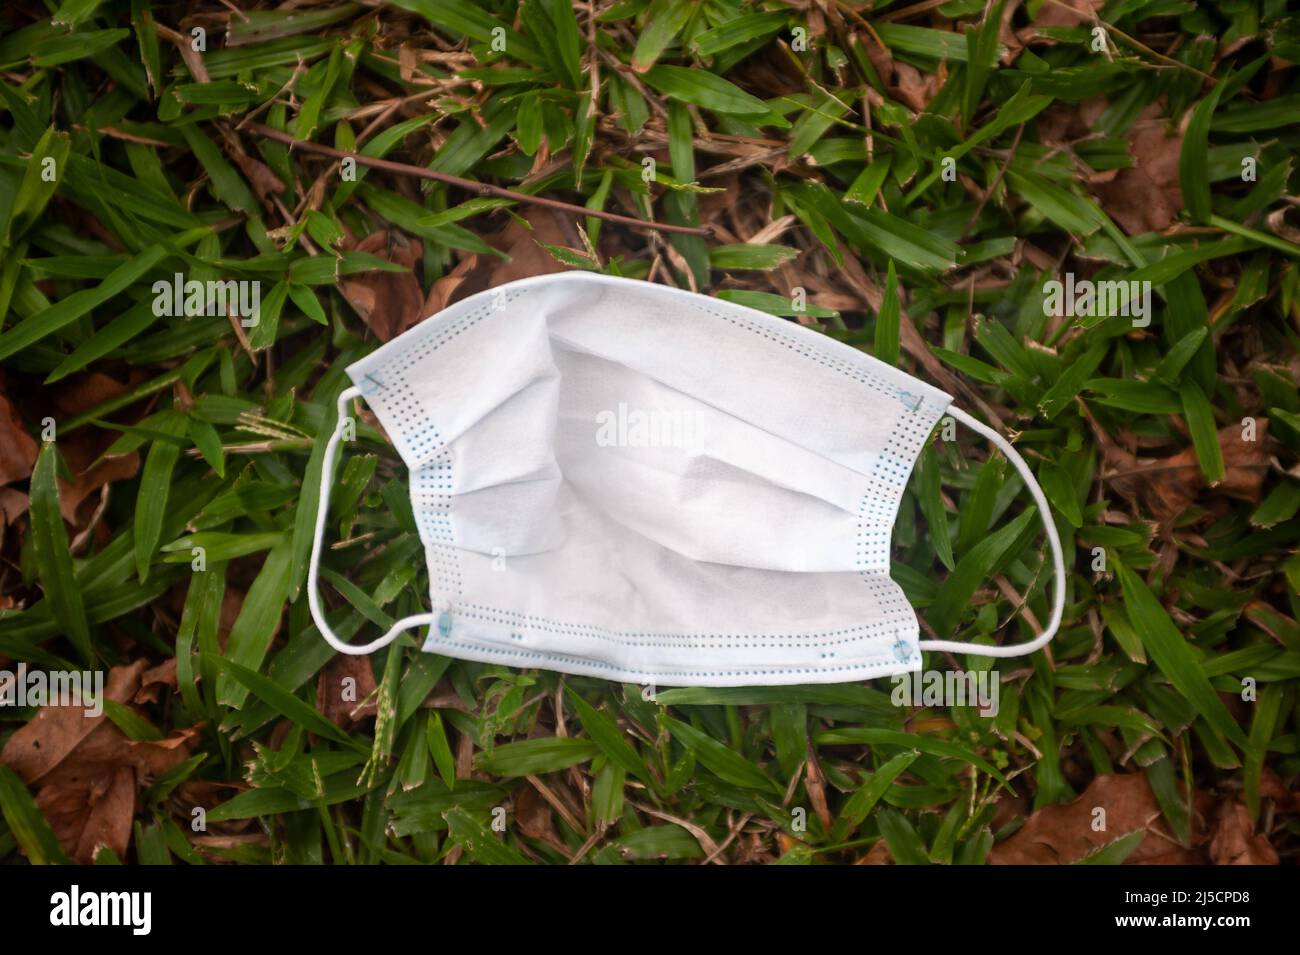 07/06/2020, Singapore, Republic of Singapore, Asia - A discarded and used mouthguard to protect against Covid-19 (coronavirus) infection lies on the ground in the grass. [automated translation] Stock Photo